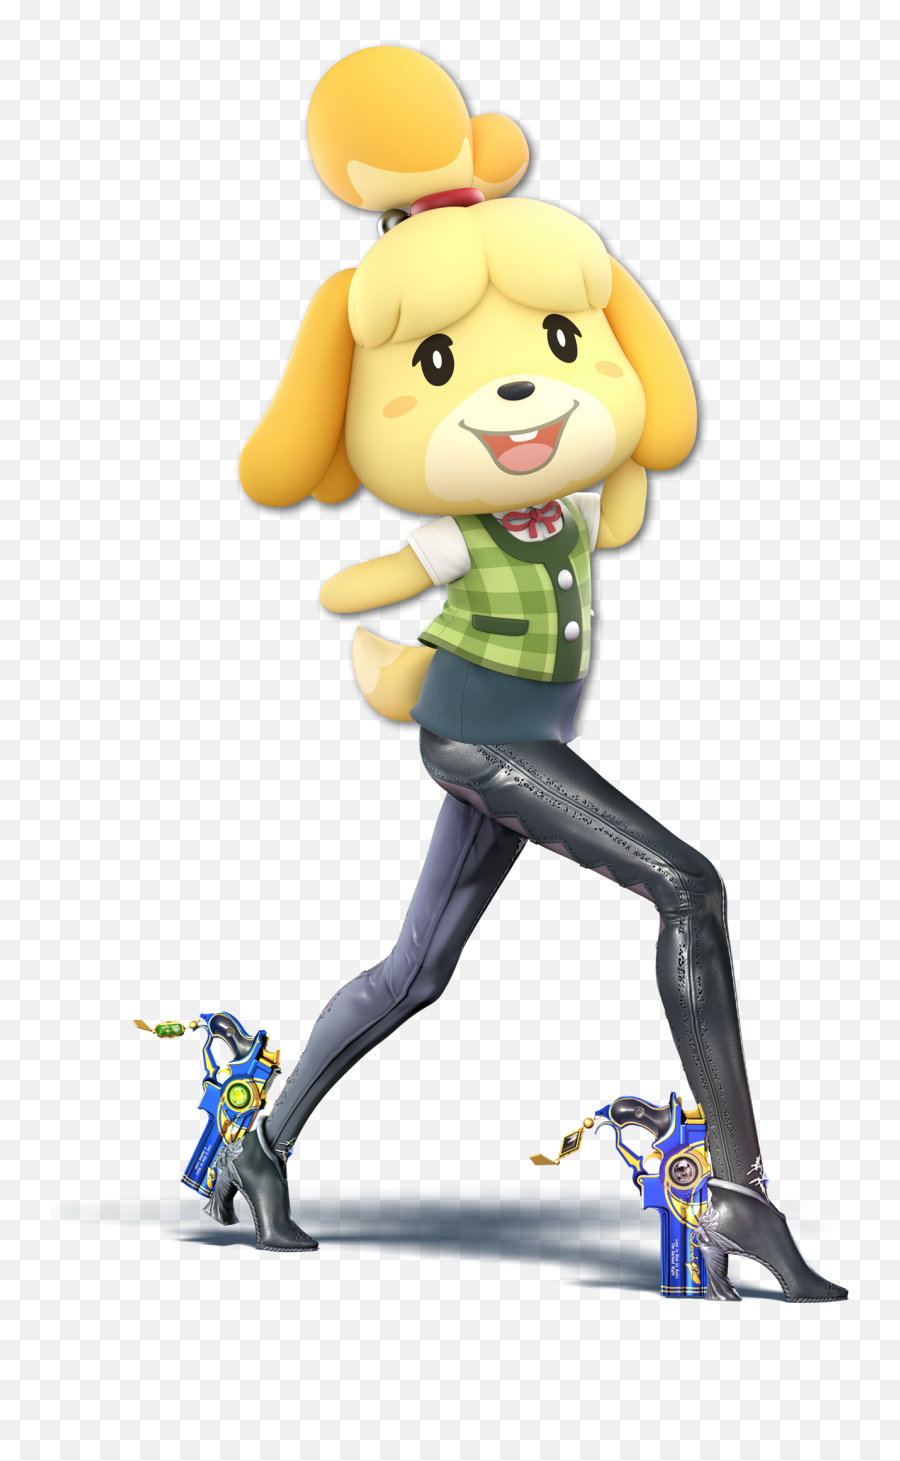 I Found This Abomination In The Wild Animalcrossing - Super Smash Bros Ultimate Isabelle Render Emoji,Animal Crossing Emotions Bummed